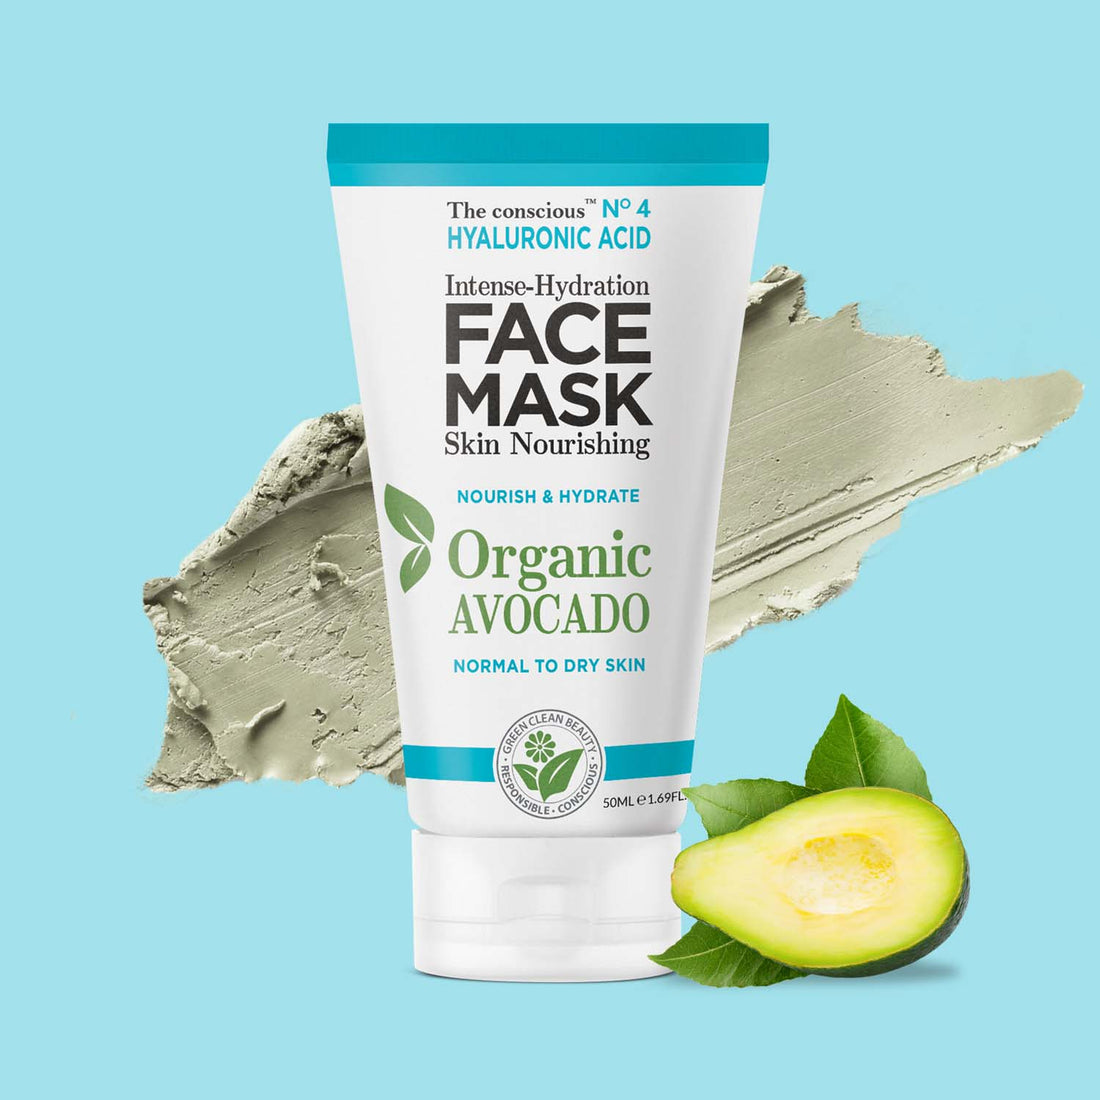 The conscious™ Hyaluronic Acid Intense-Hydration Face Mask Organic Avocado